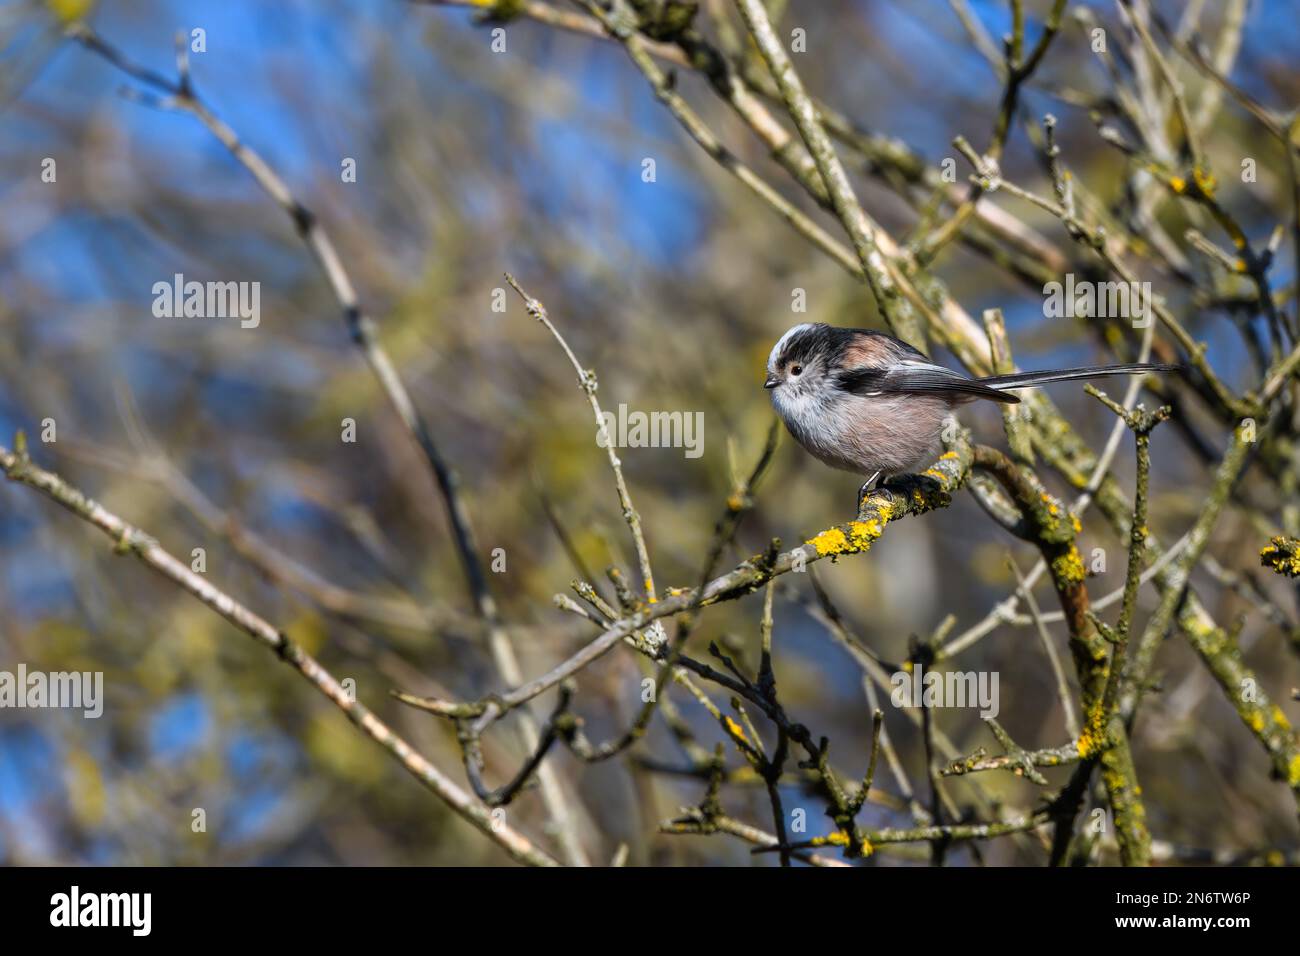 Long Tailed Tit, Aegithalos caudatus, perched on a tree branch. winter, side view looking left. Stock Photo